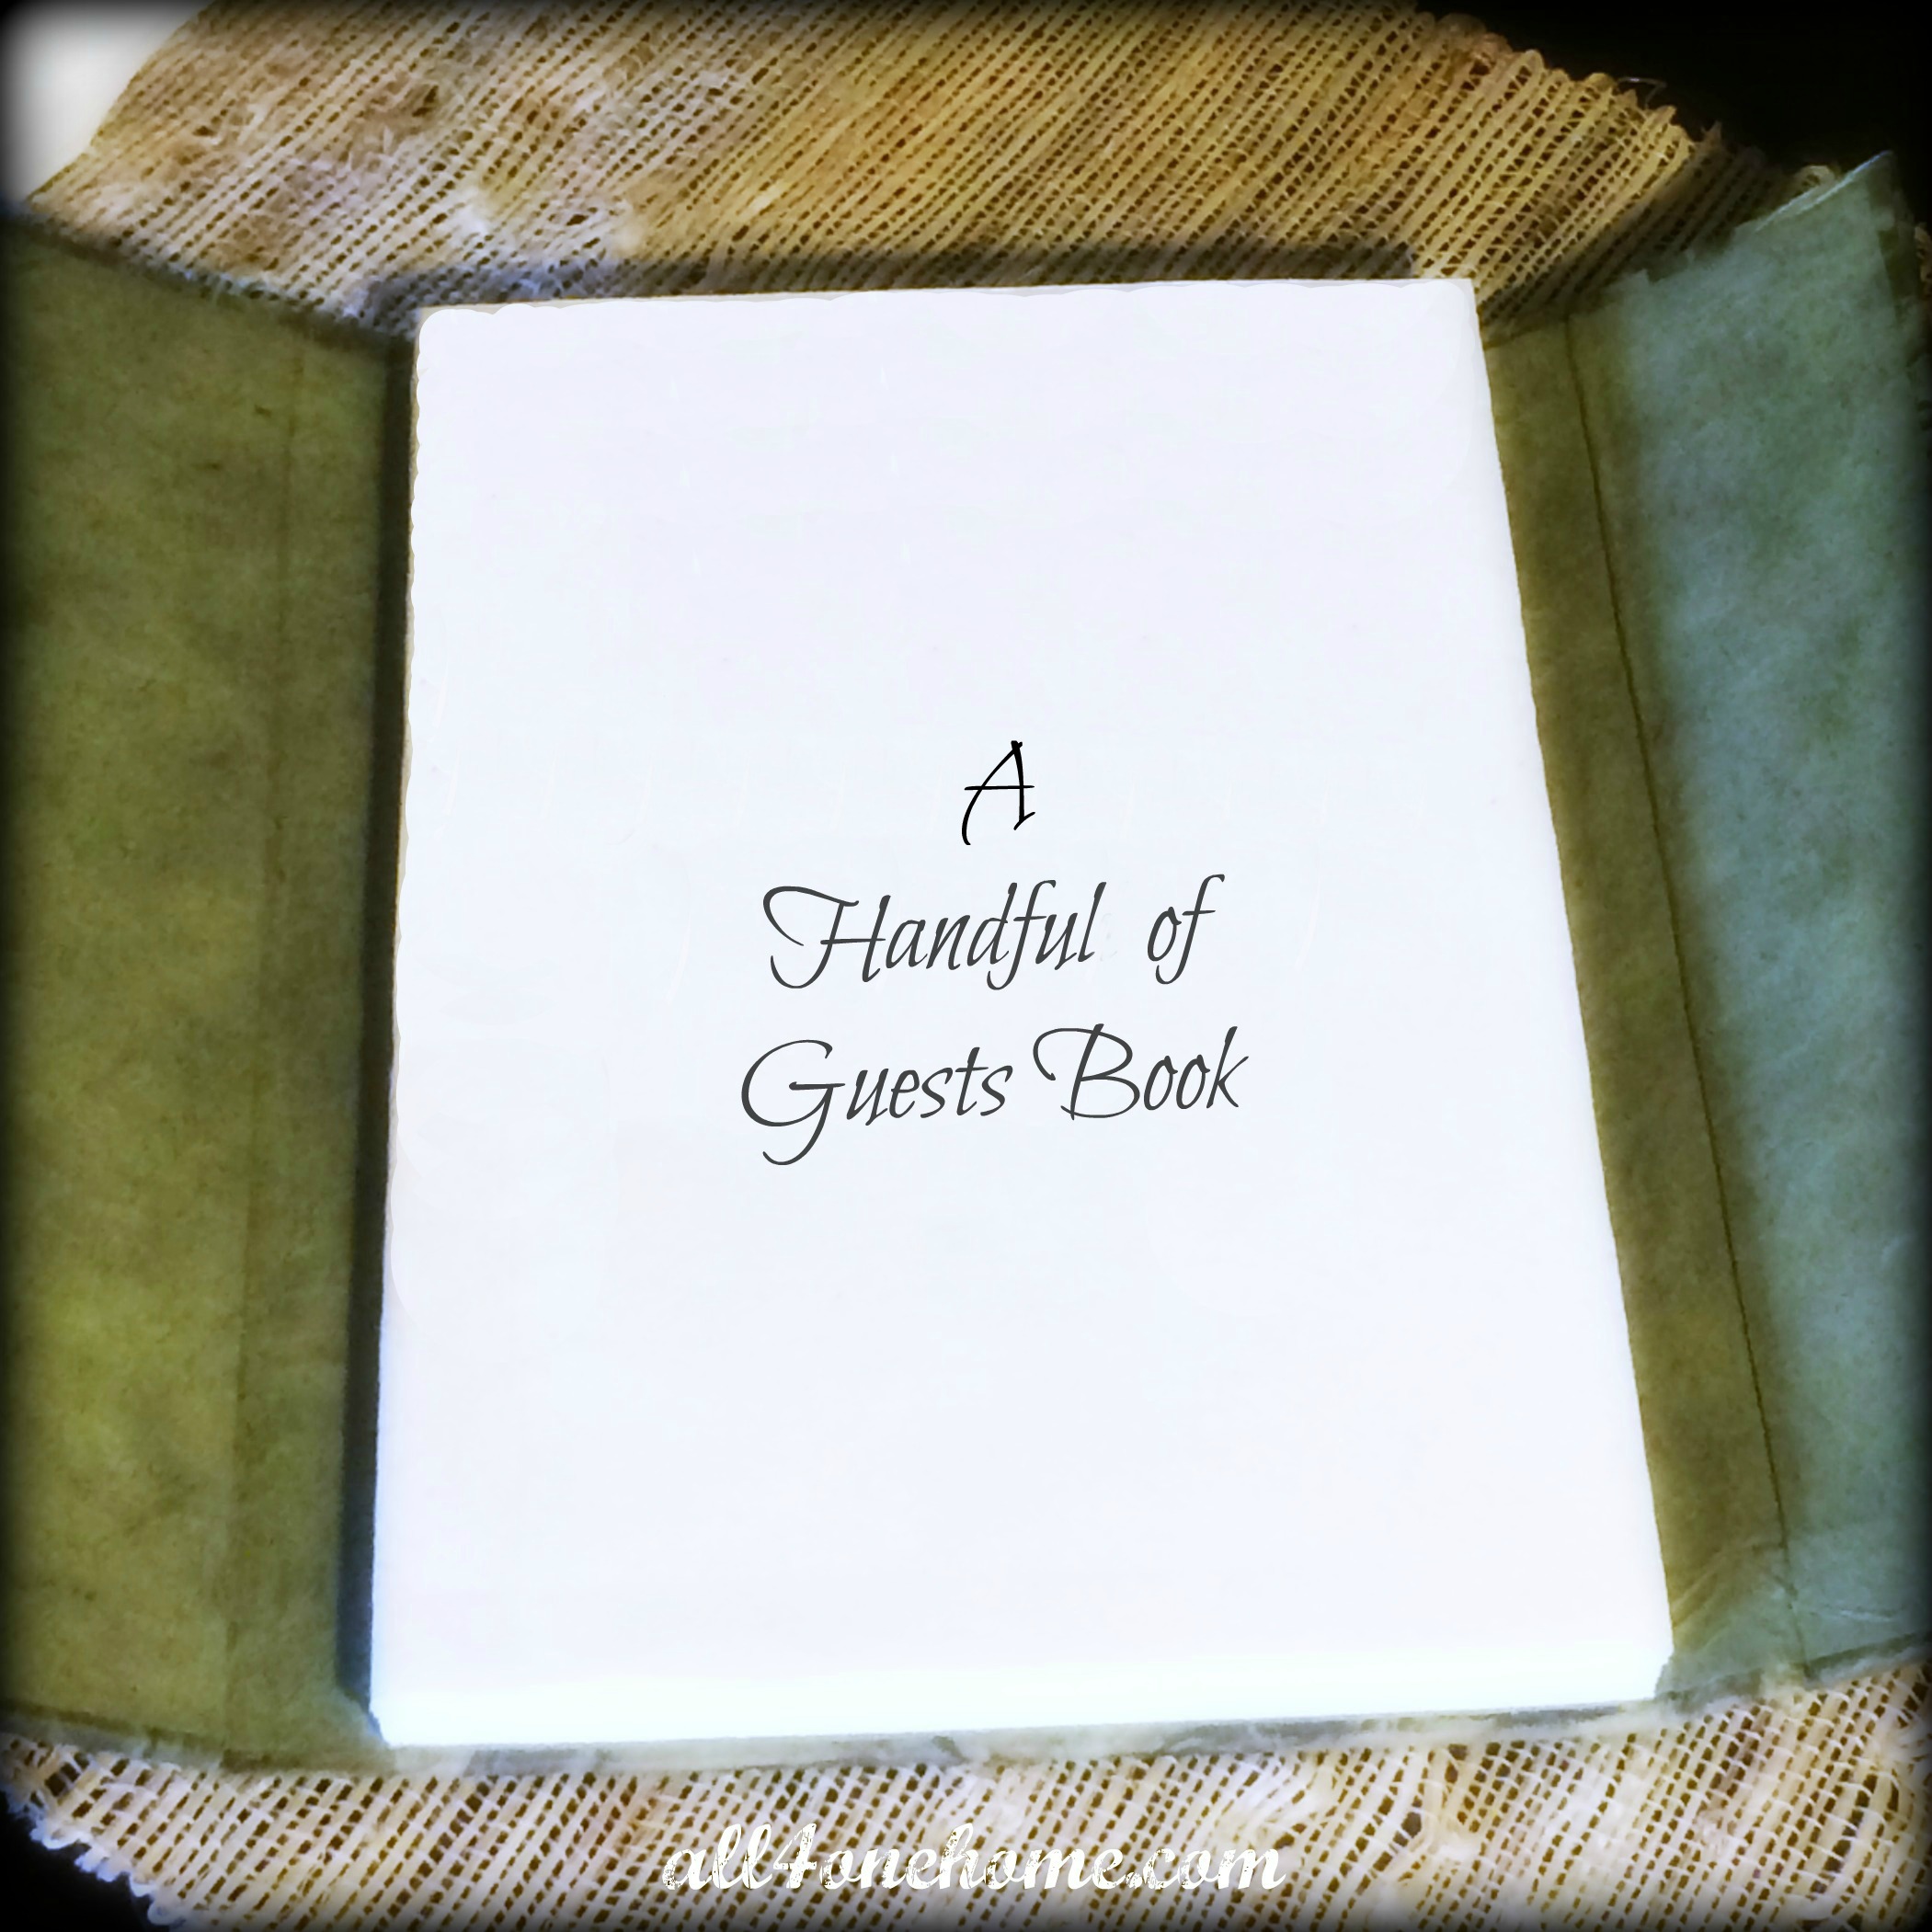 A Handful of Guests Book